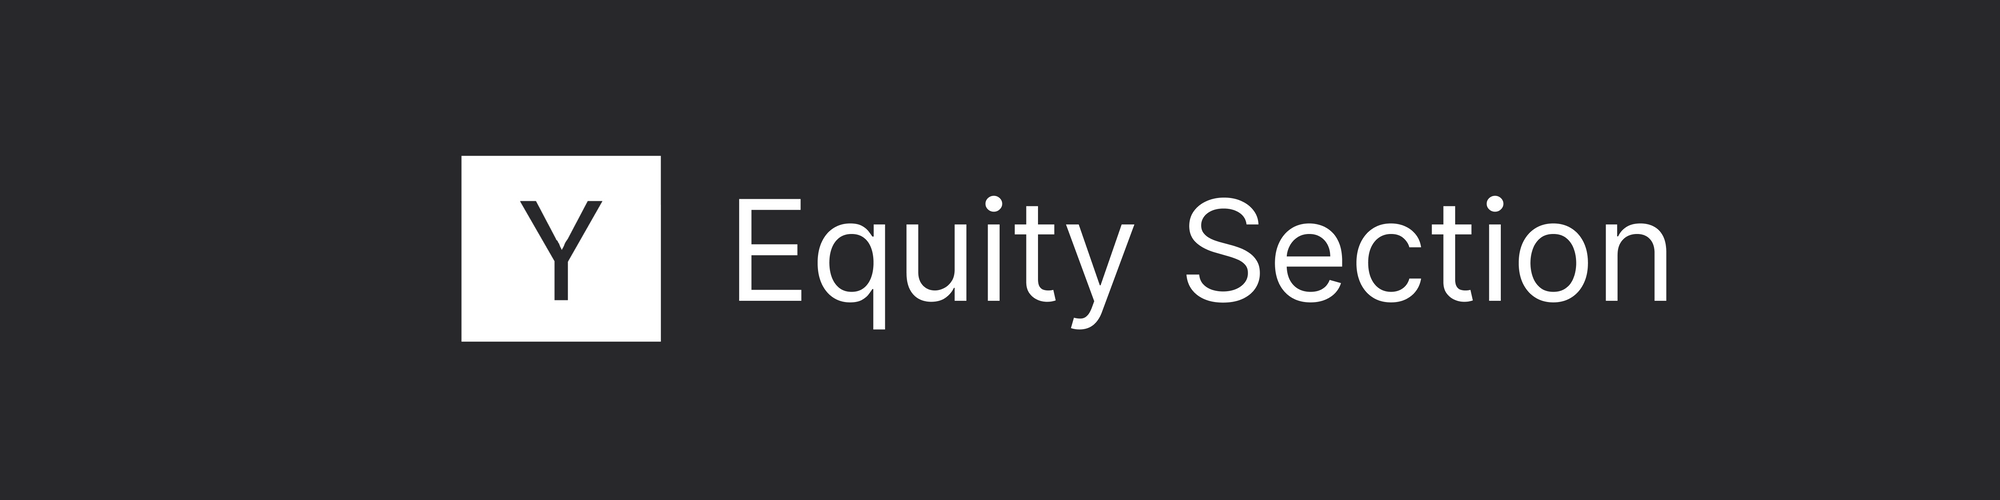 White on black banner graphic that states the section heading: Equity Section. This references the corresponding section of the Y Combinator application.